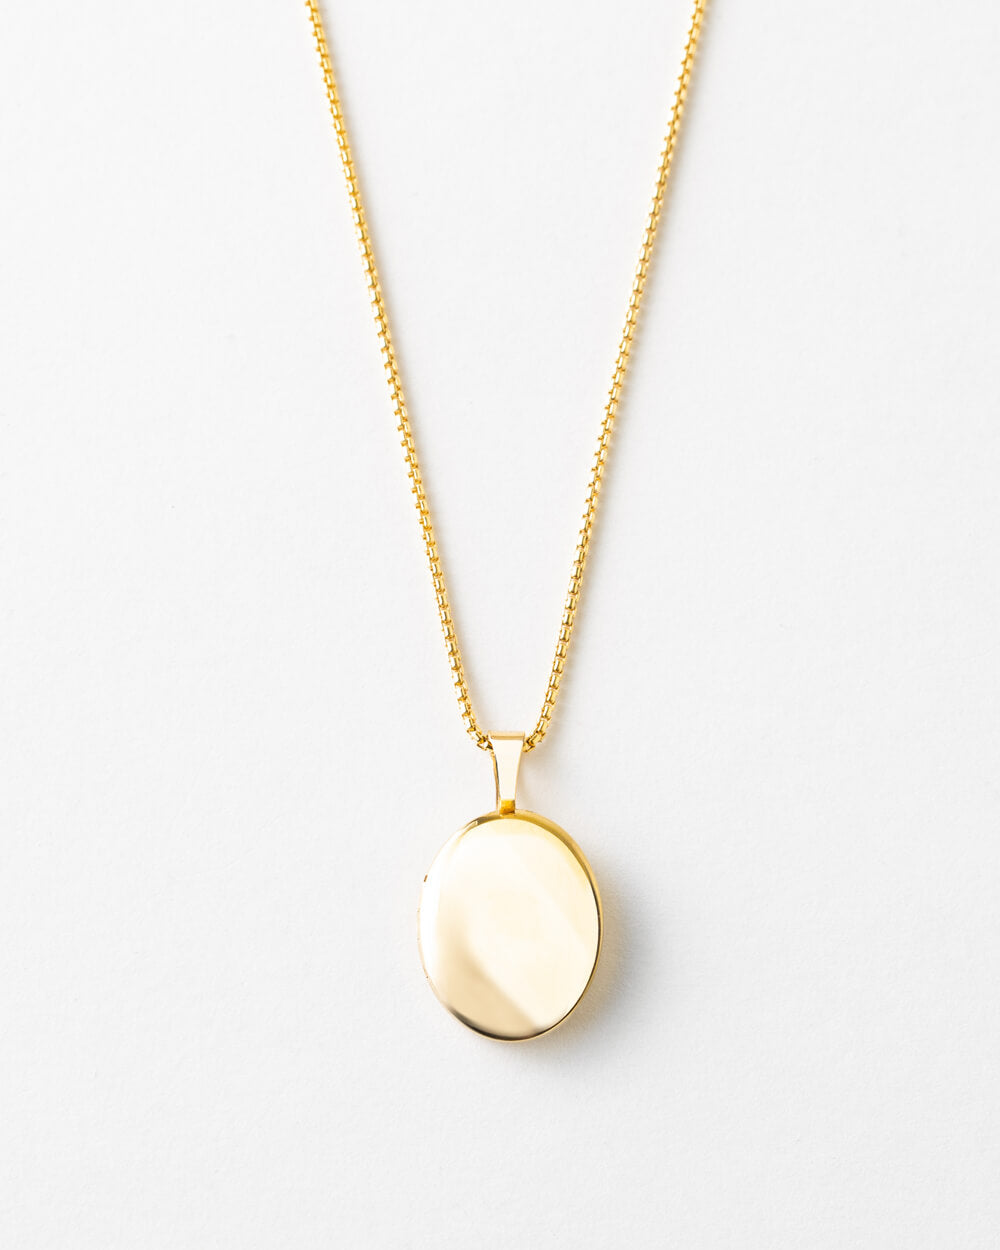 Shop Oval Locket Necklace | Personalized Oval Necklace - GLDN — GLDN